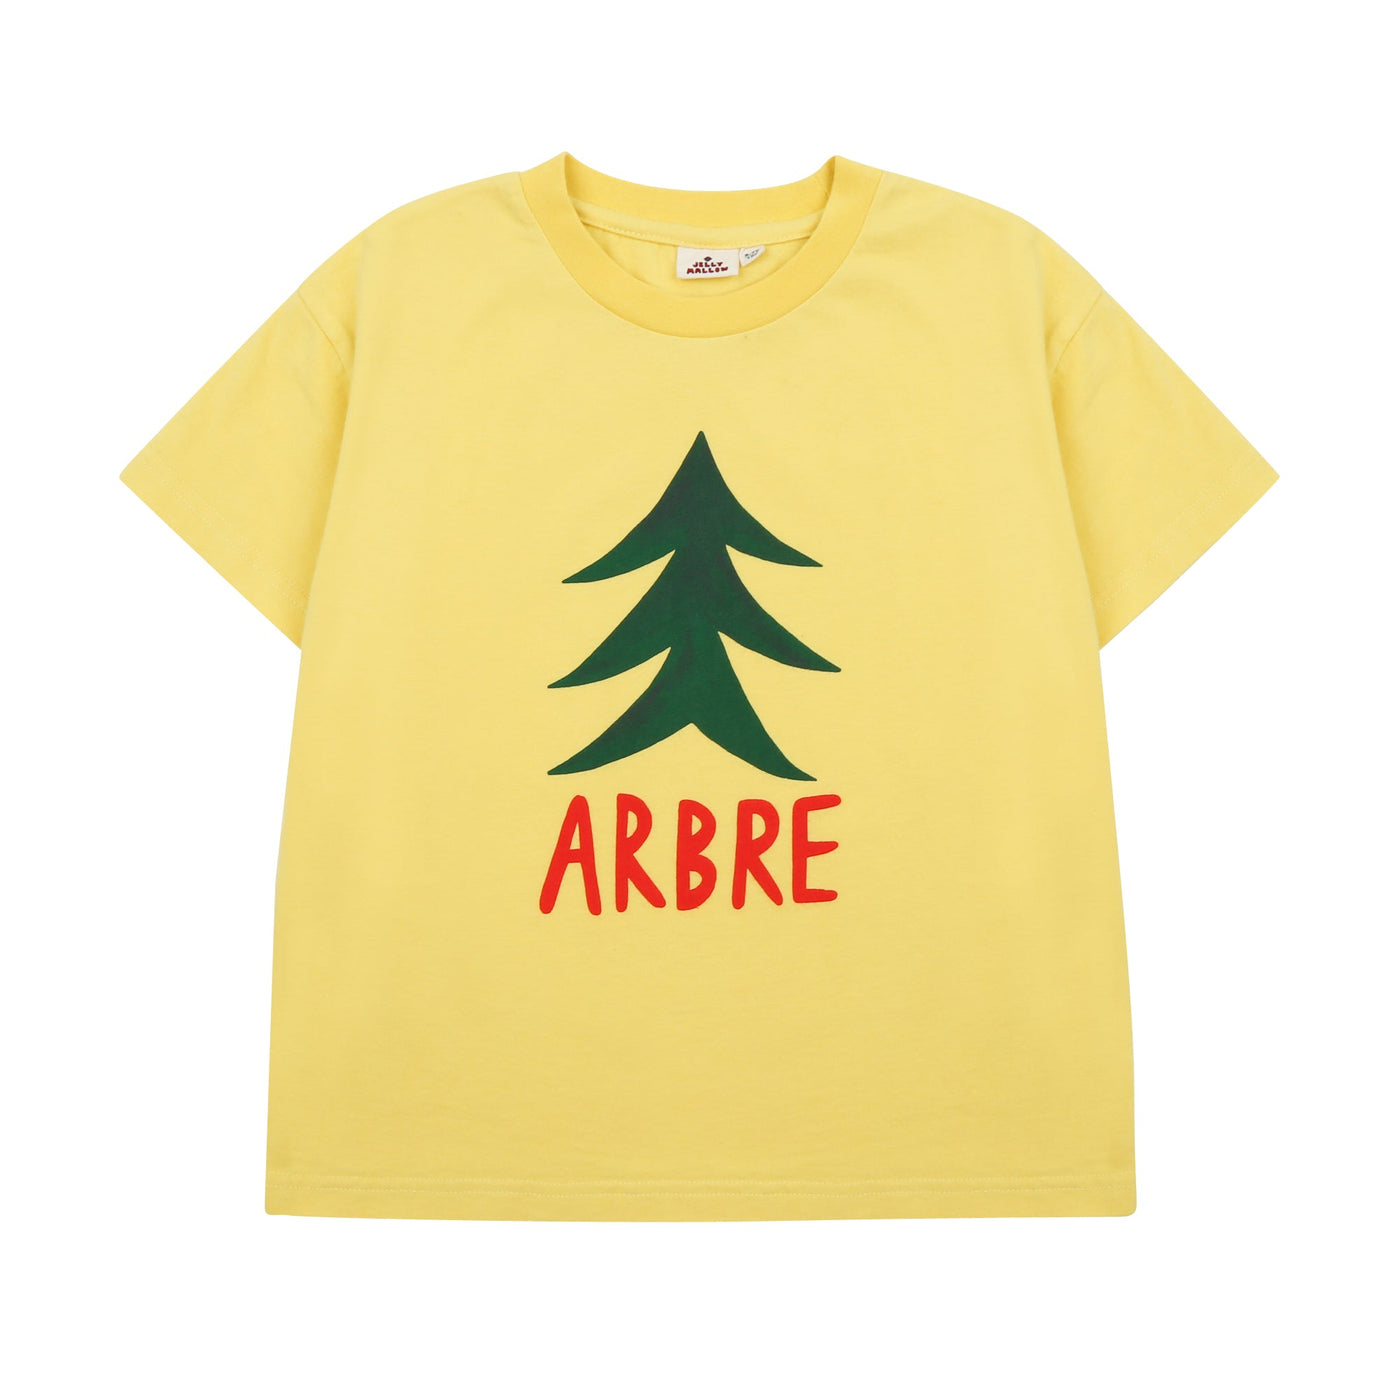 Arbre Tee by Jelly Mallow - Petite Belle